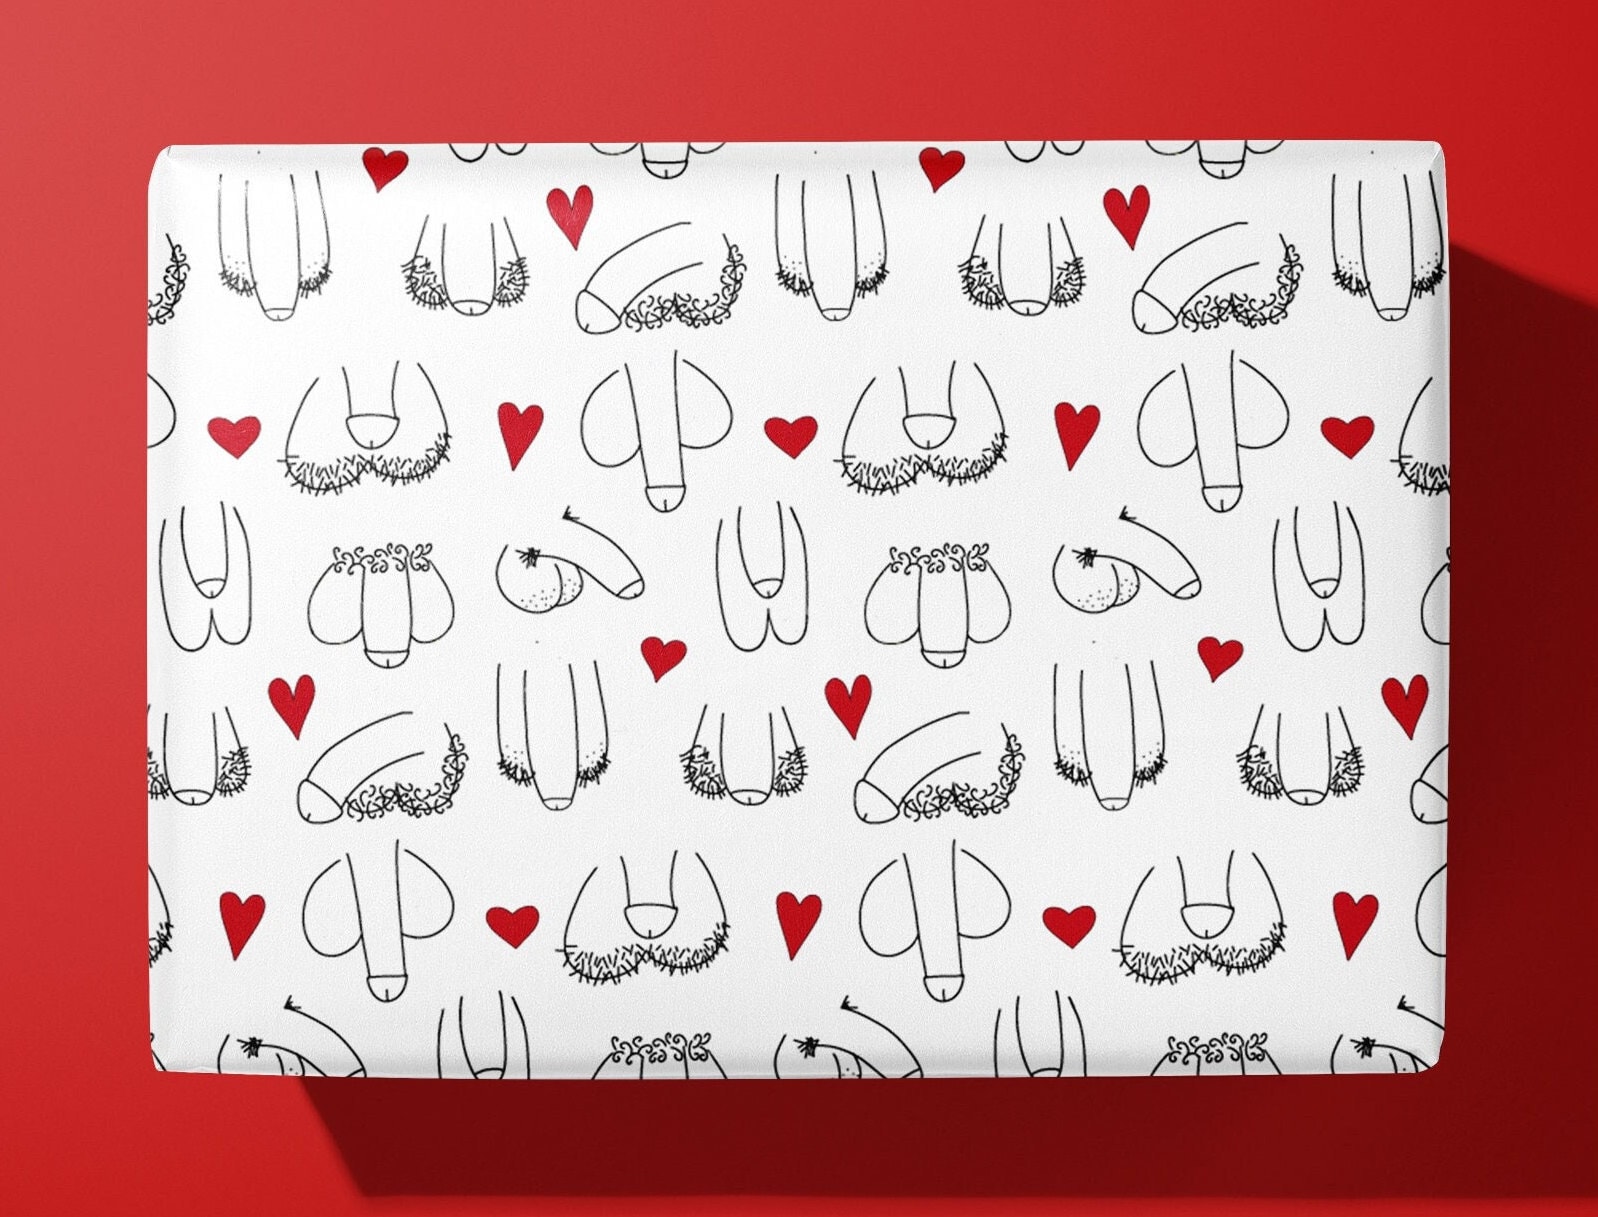 Love Penis / Dick Wrapping Paper Funny Wrapping Paper Hand 